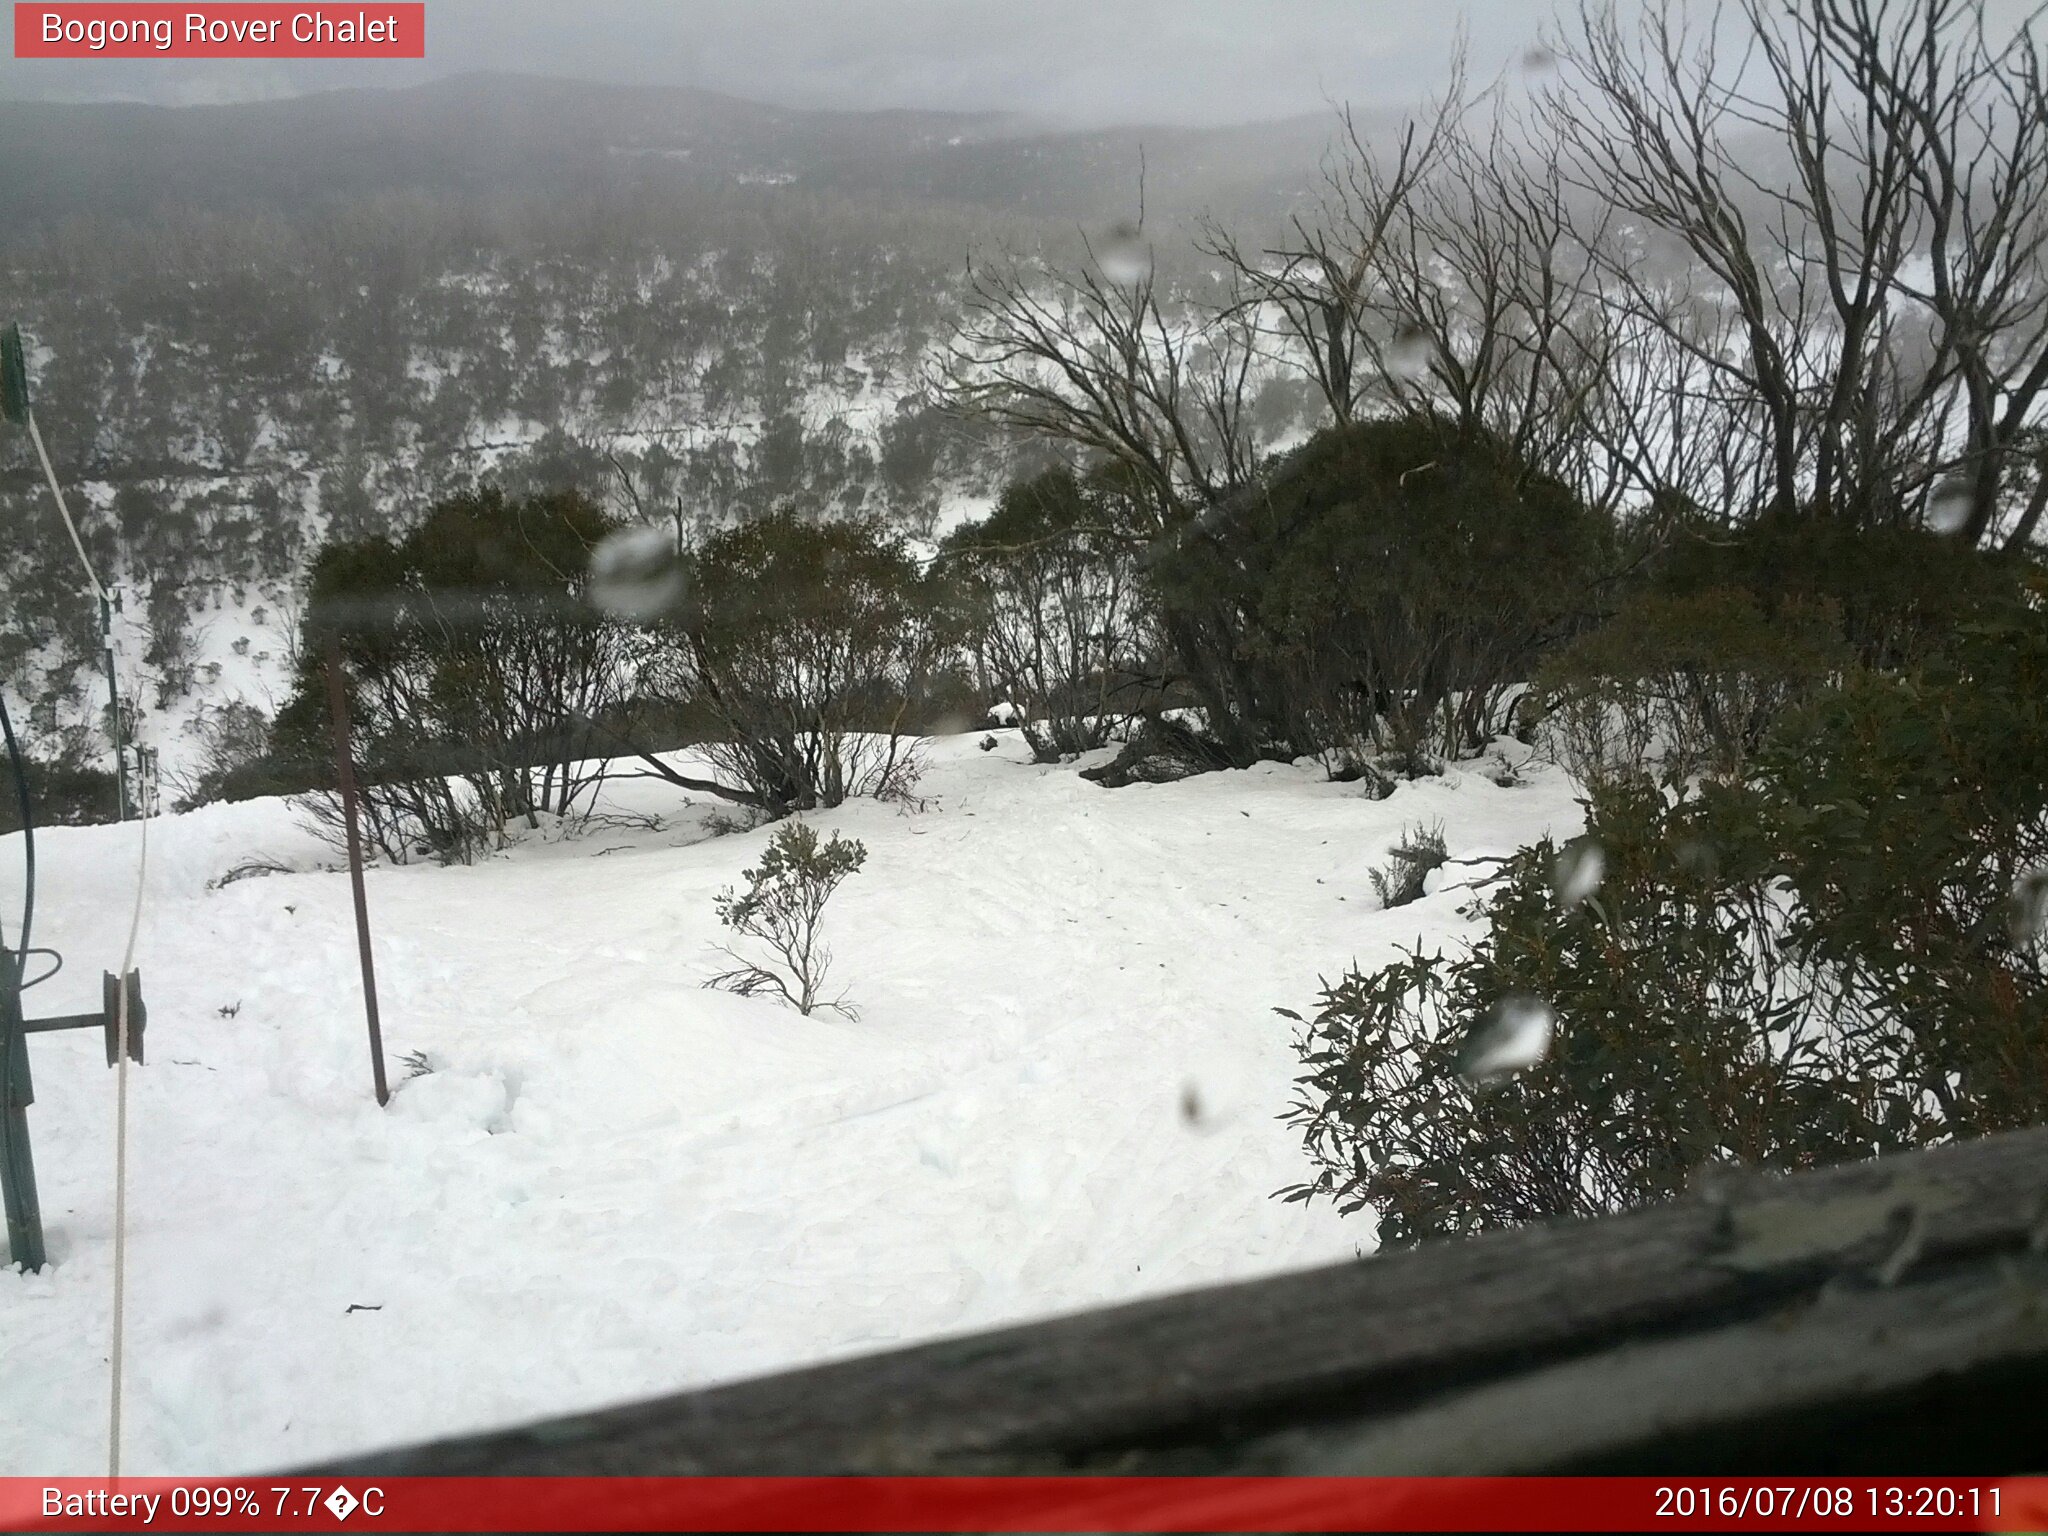 Bogong Web Cam 1:20pm Friday 8th of July 2016